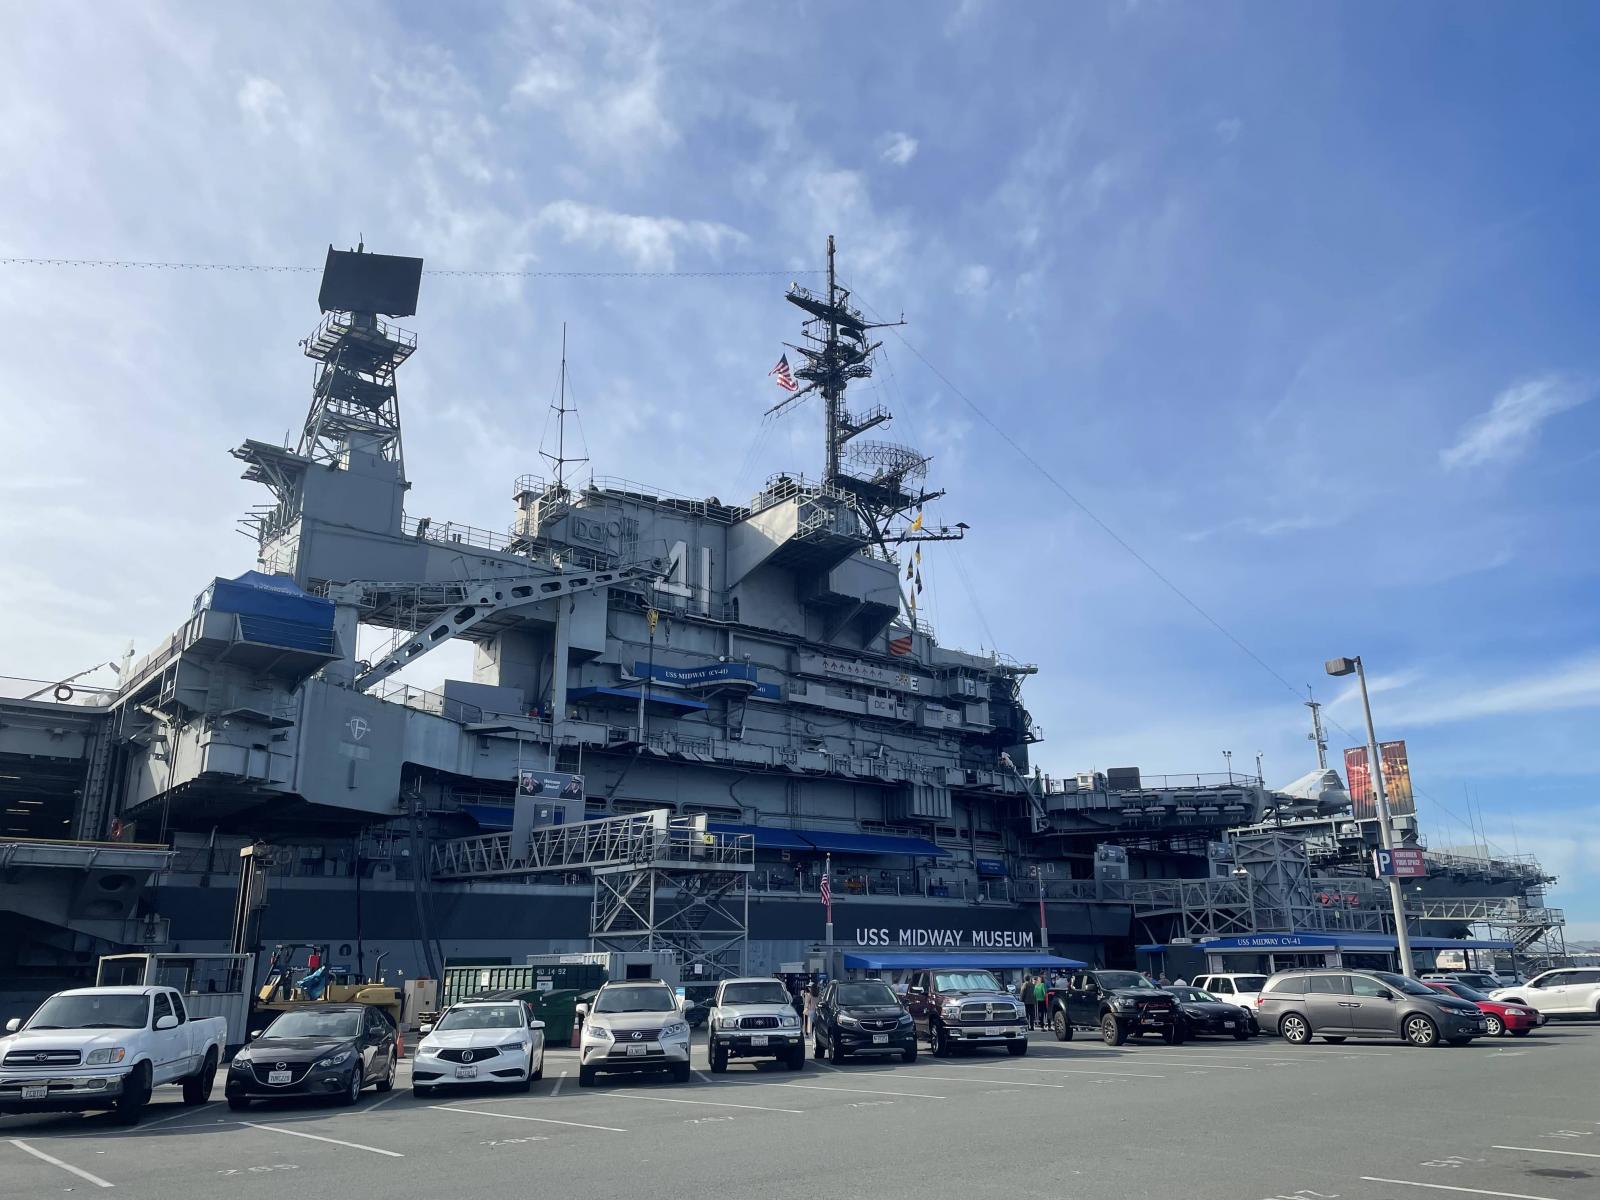 USS midway museum